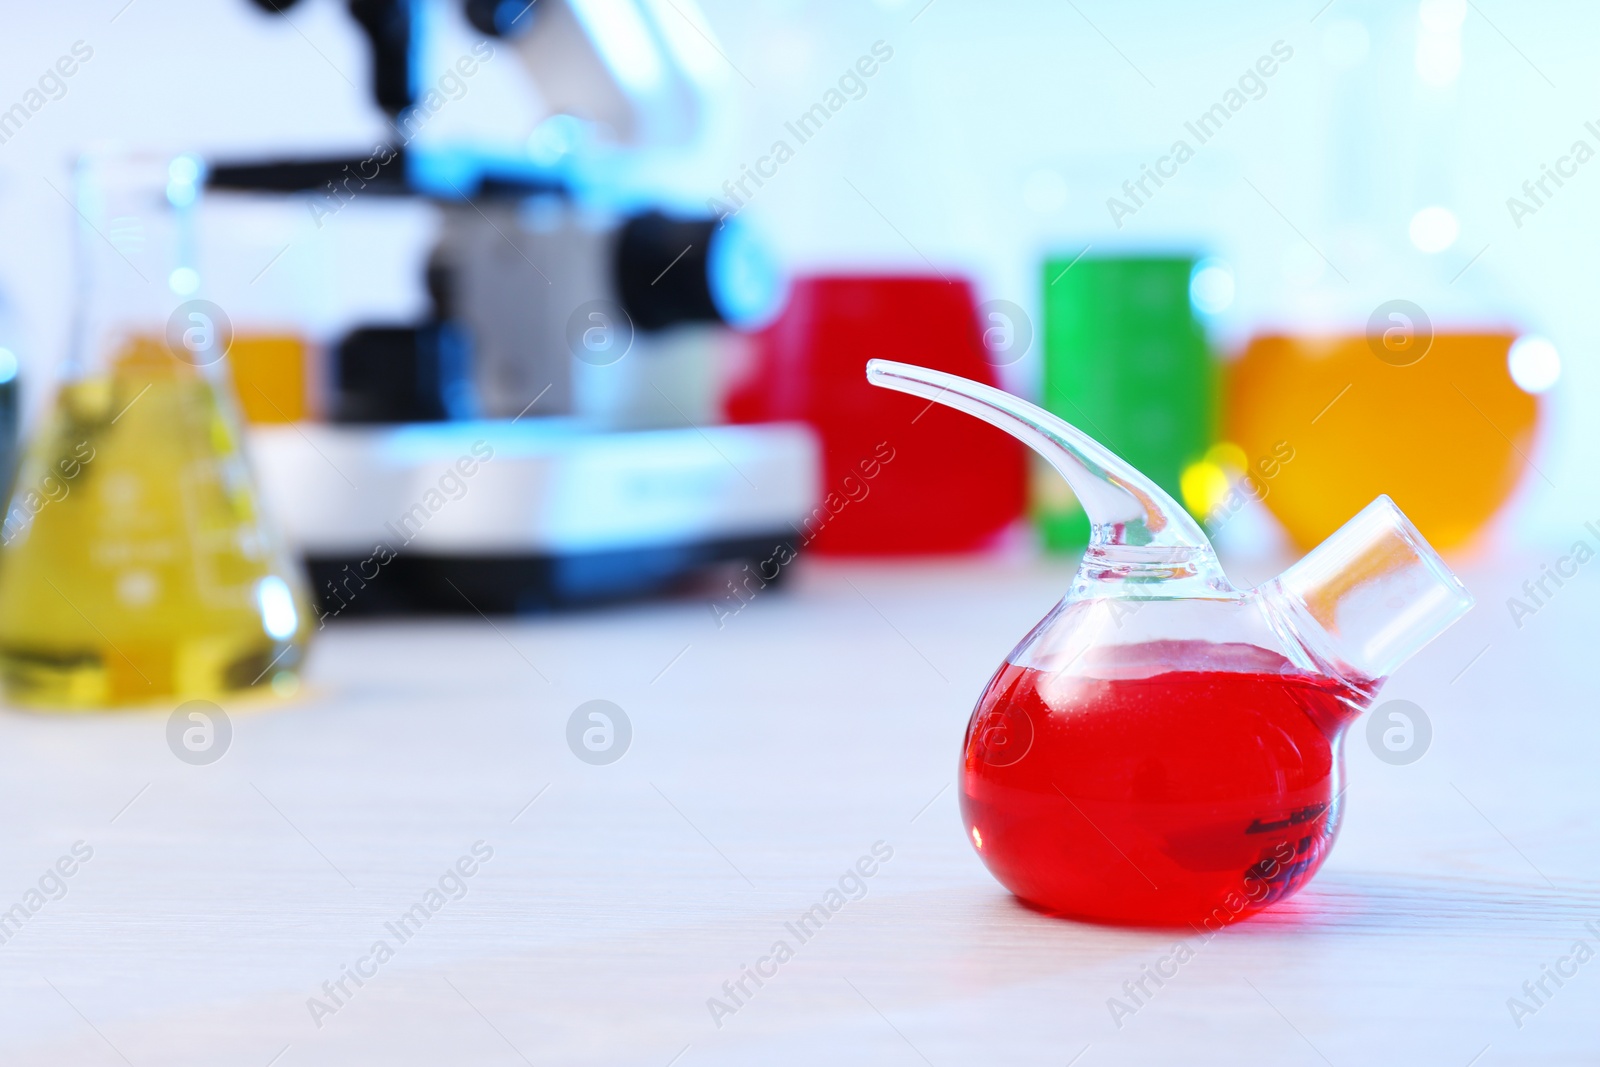 Photo of Retort flask with sample on table in chemistry laboratory, space for text